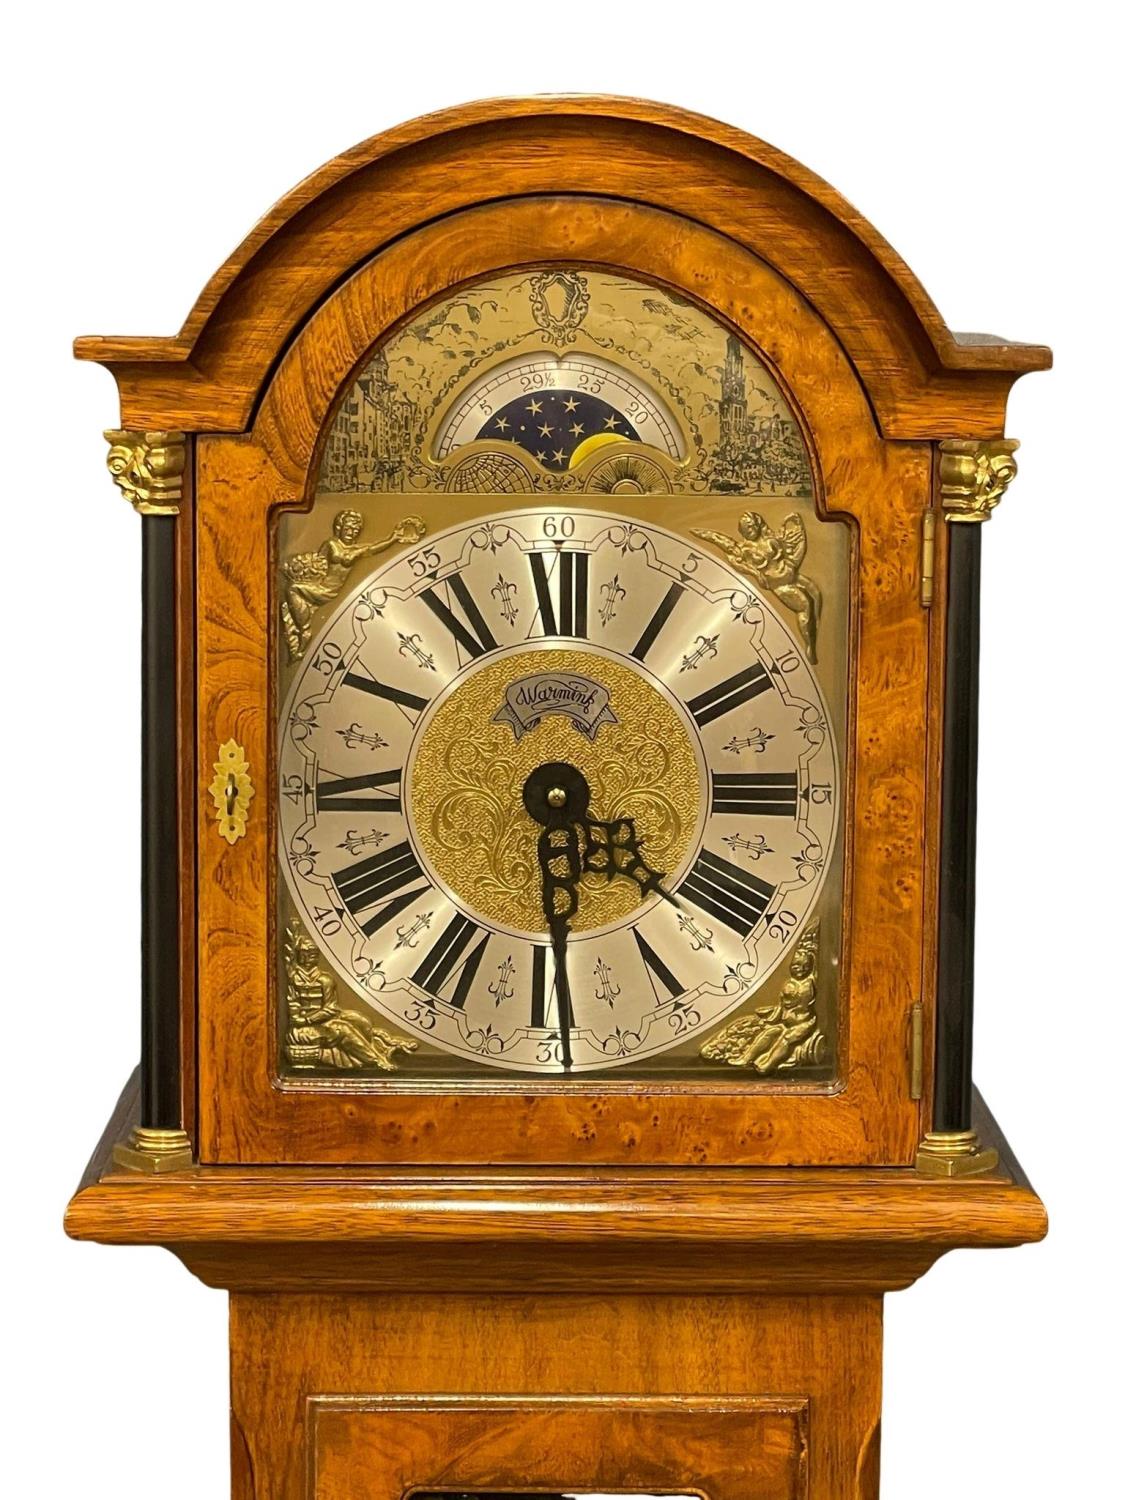 A mahogany and burr walnut long case clock with brass moon dial face. By Warmink. Weights and - Image 3 of 3